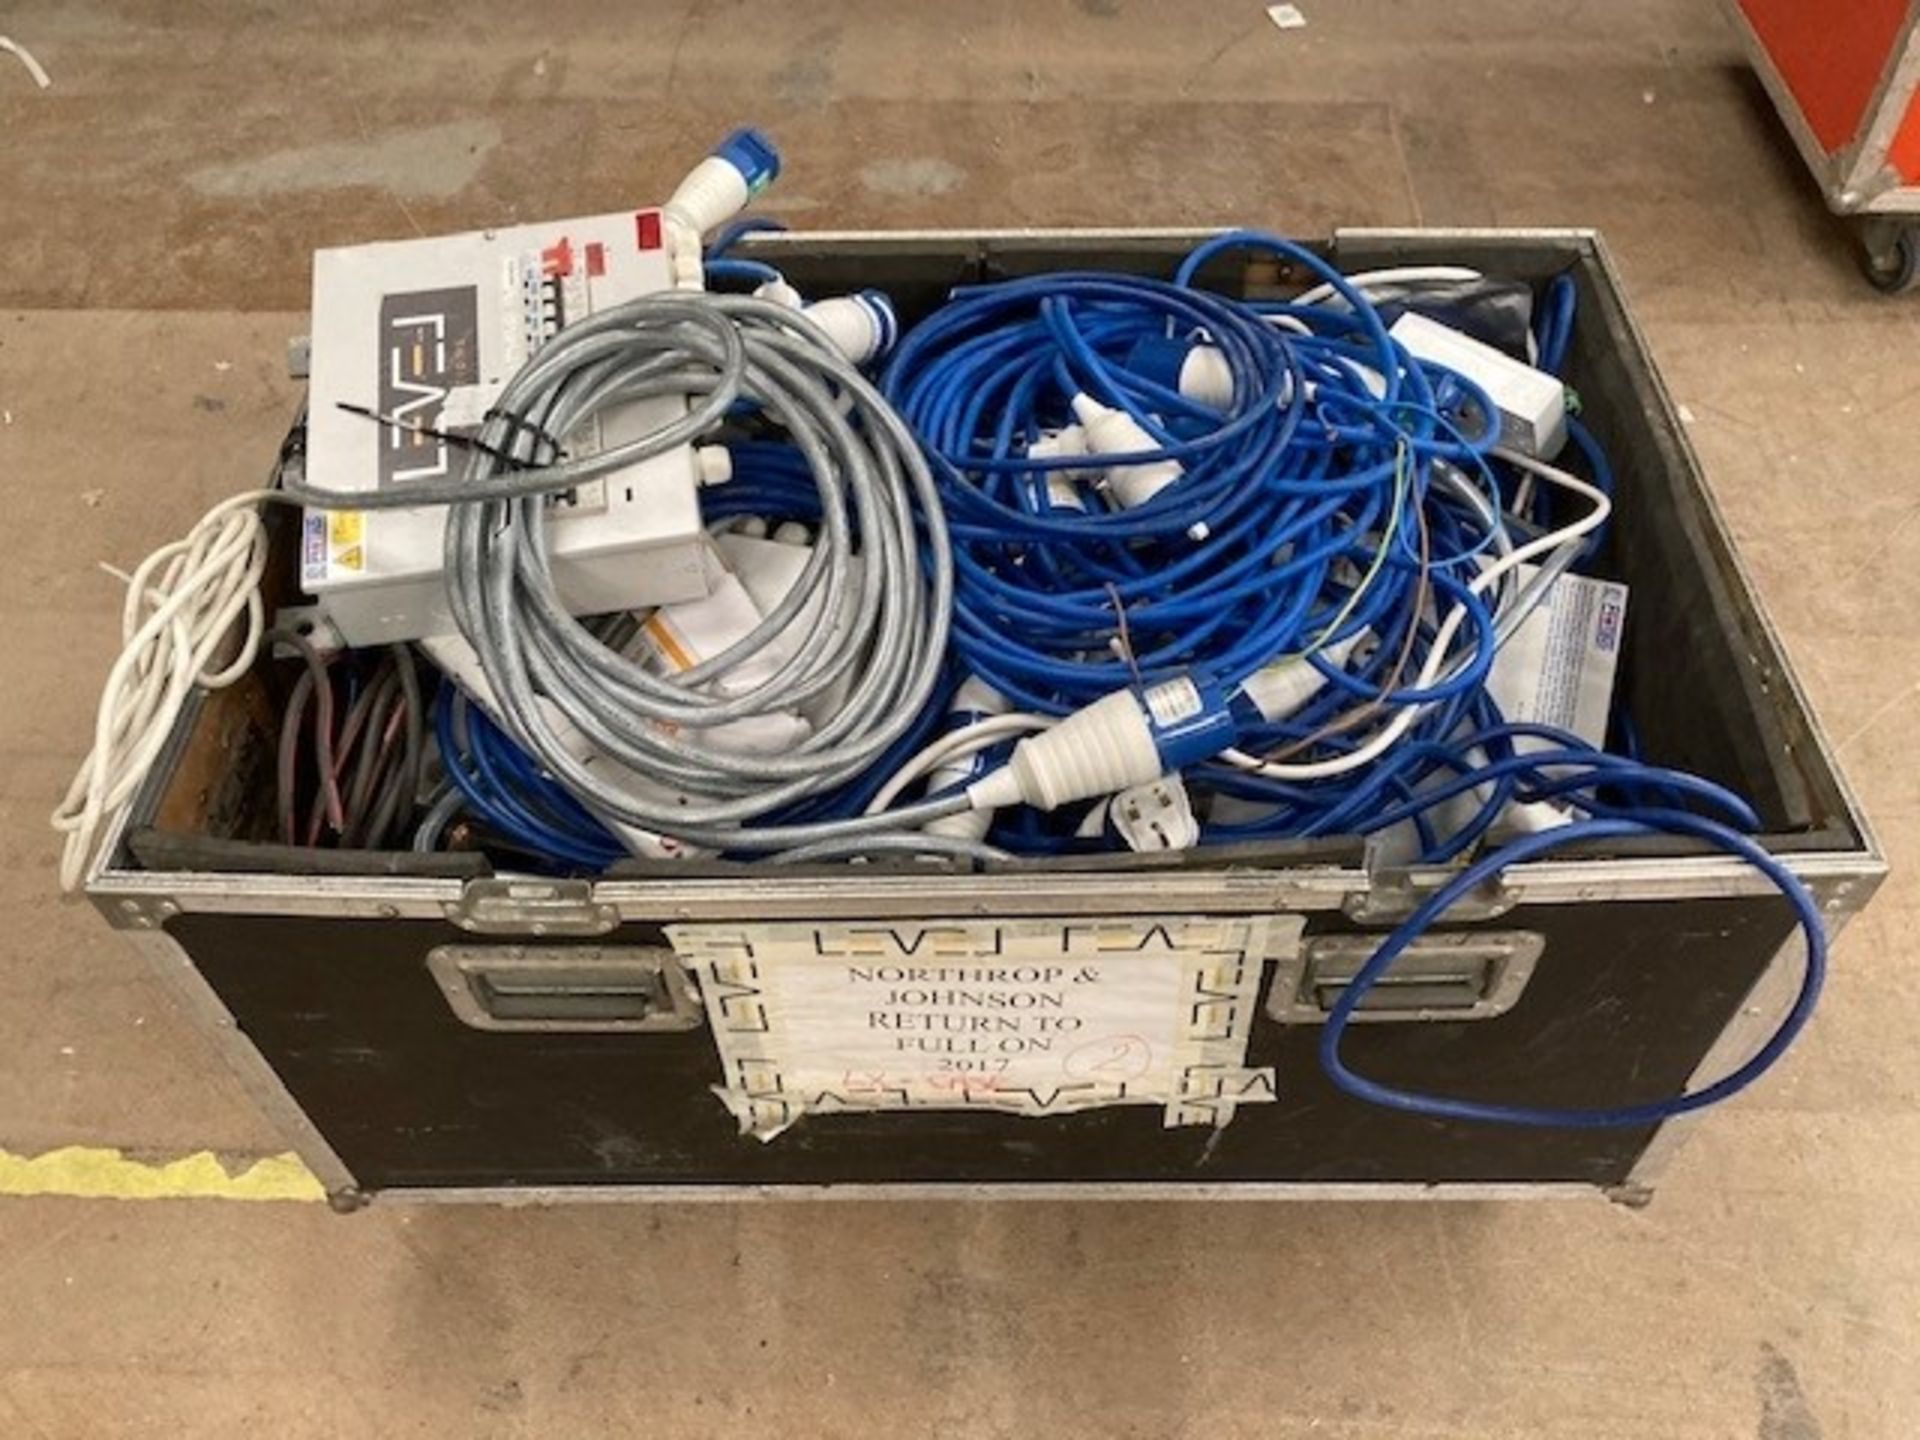 Flight Case & Large Quantity of Three Phase Cables